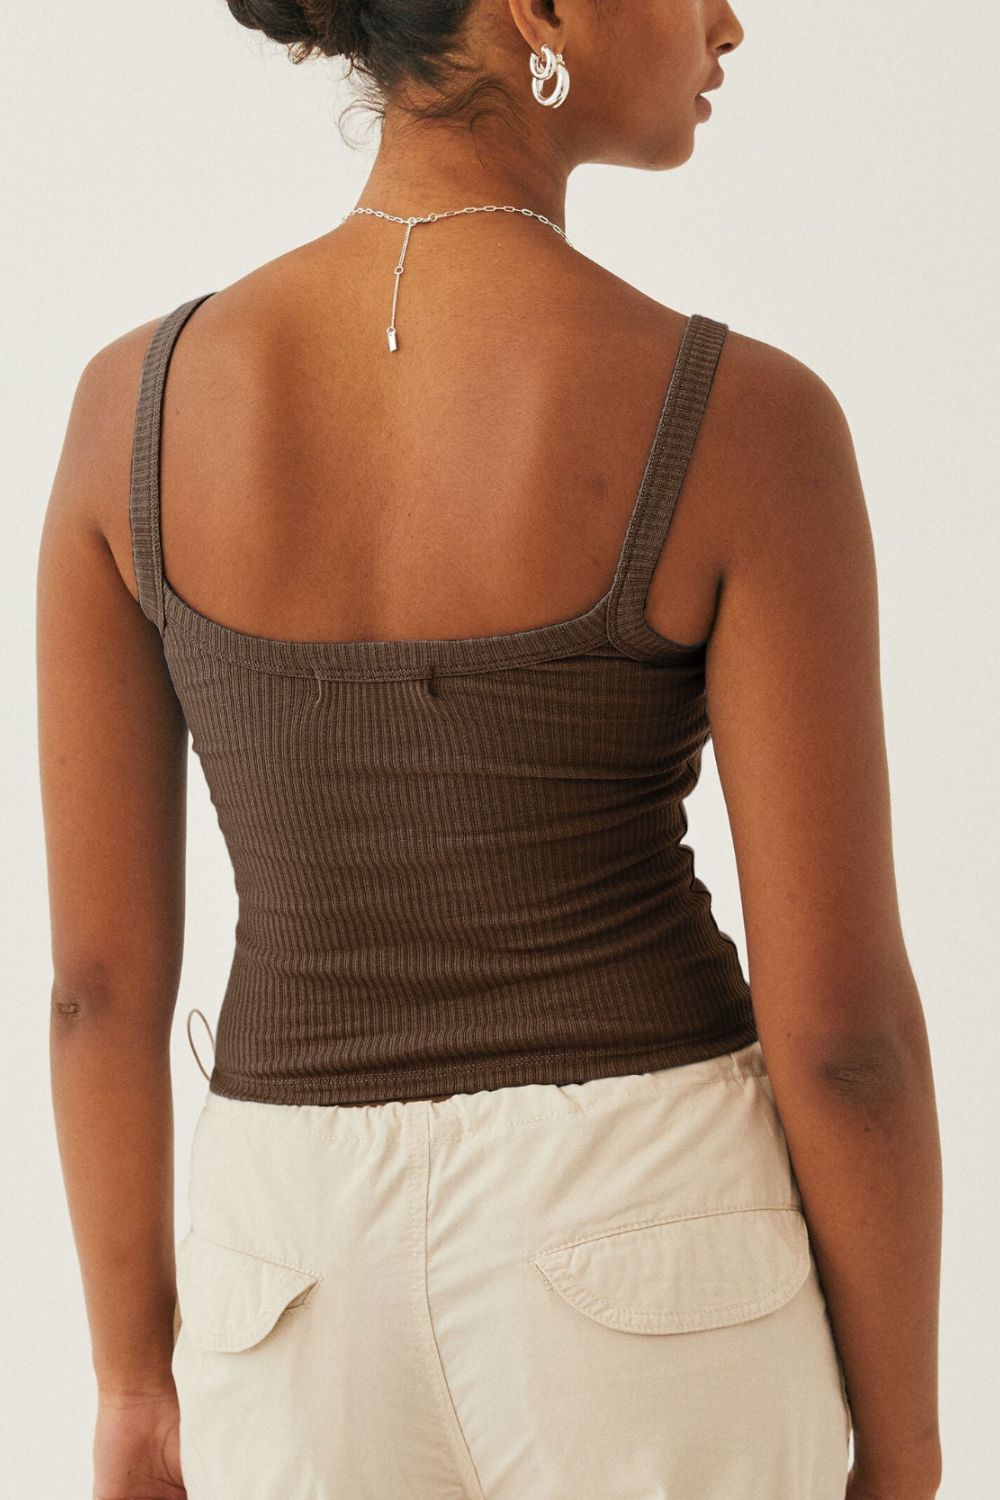 In Your Dreams Ribbed Cropped Cami - 6 Colors - Shop All Around Divas